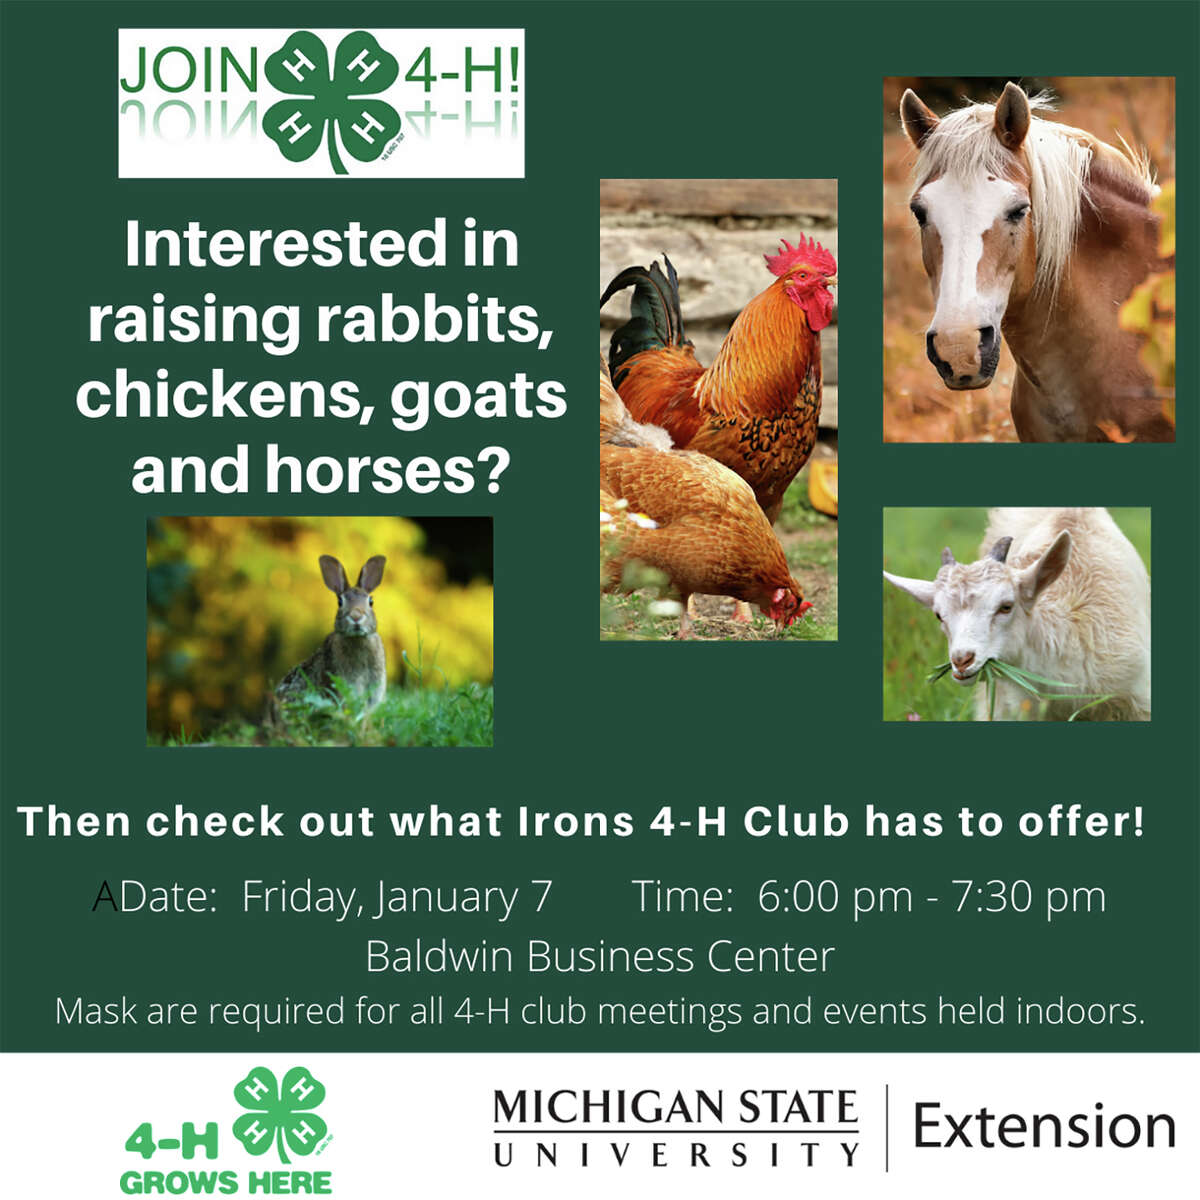 Lake County 4-H will be hosting an informational meeting and 4-H club sign up event from 6-7:30 p.m. Friday, Jan. 7, at the Baldwin Business Center.